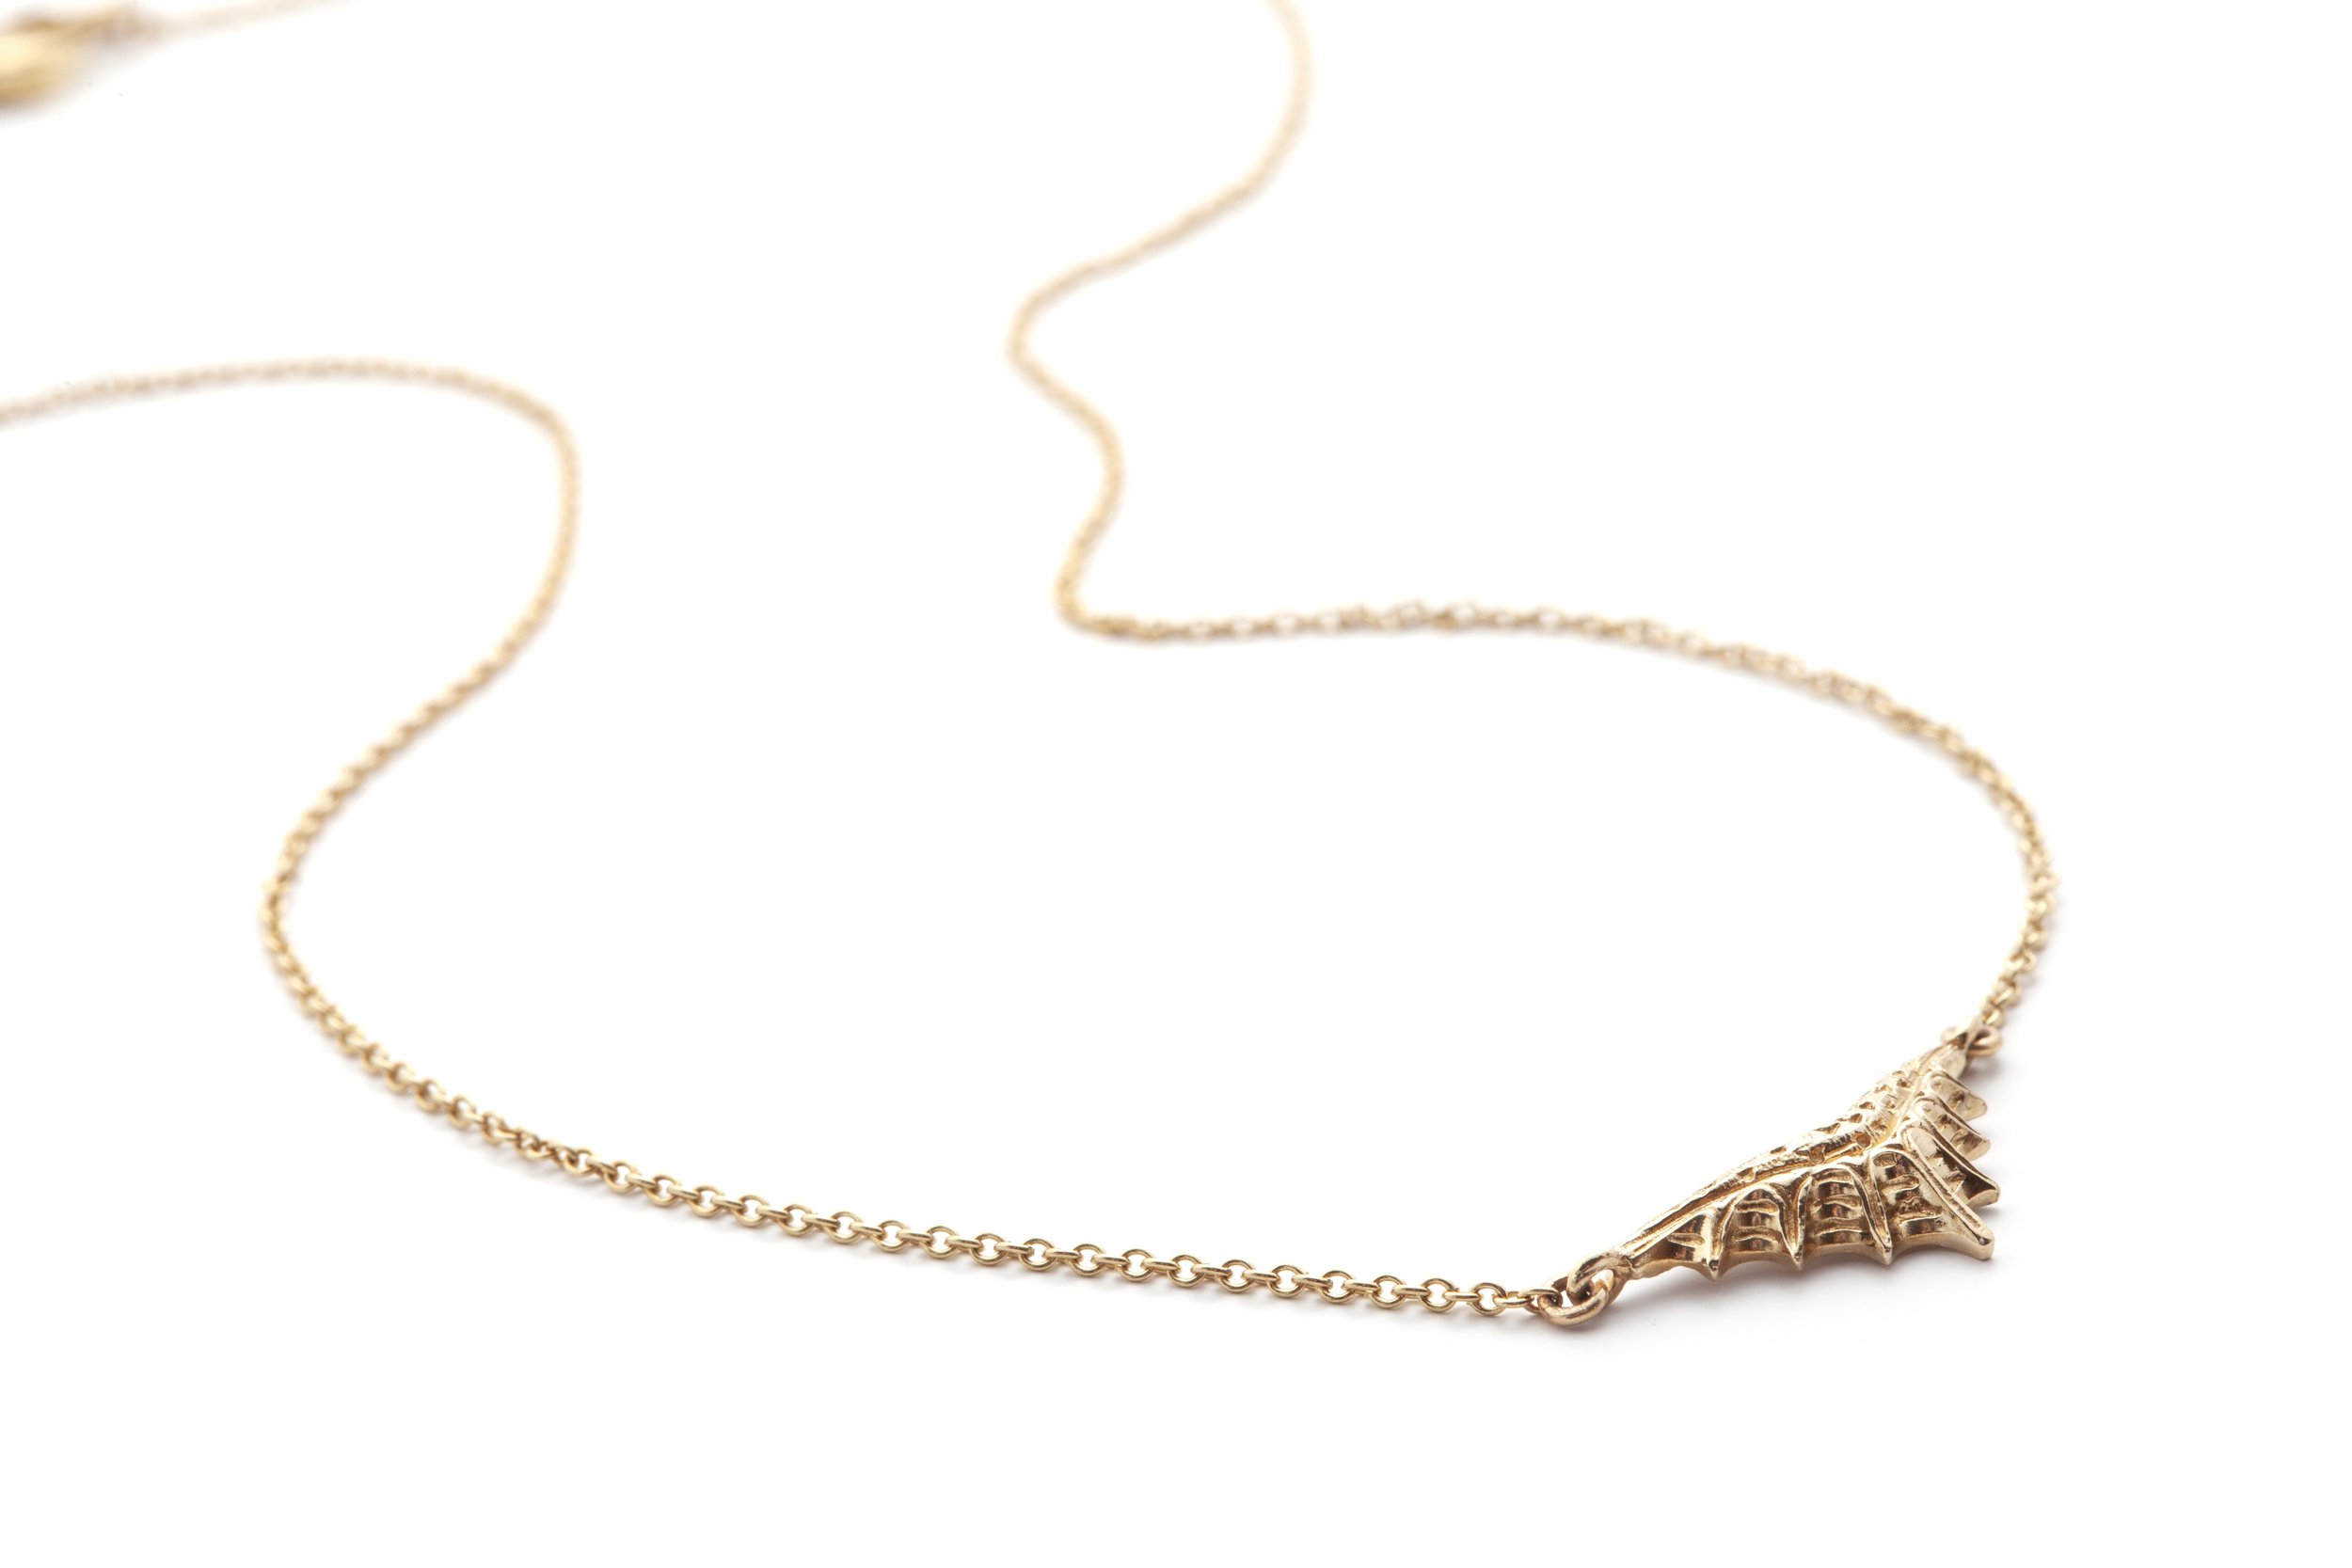 Peerie necklace in yellow gold